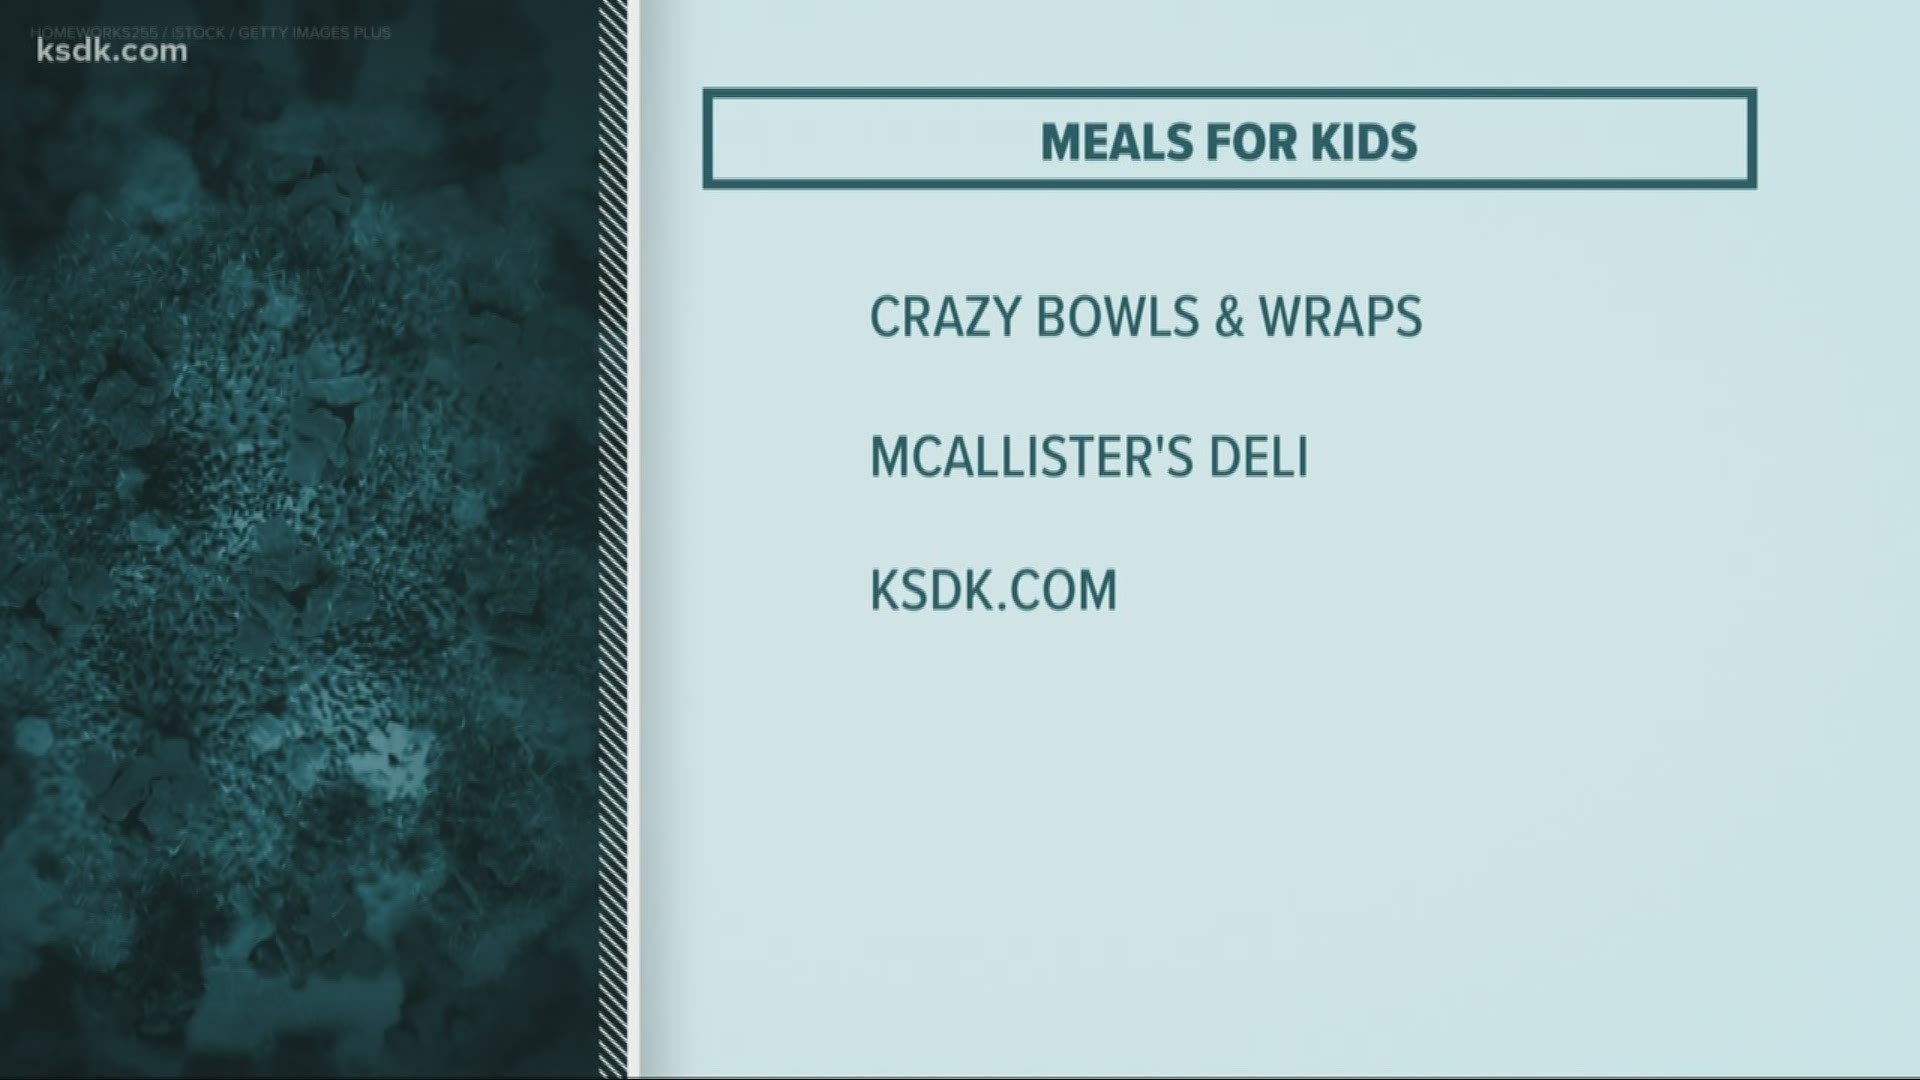 Restaurants and non-profits are offering free meals while schools are closed due to coronavirus concerns